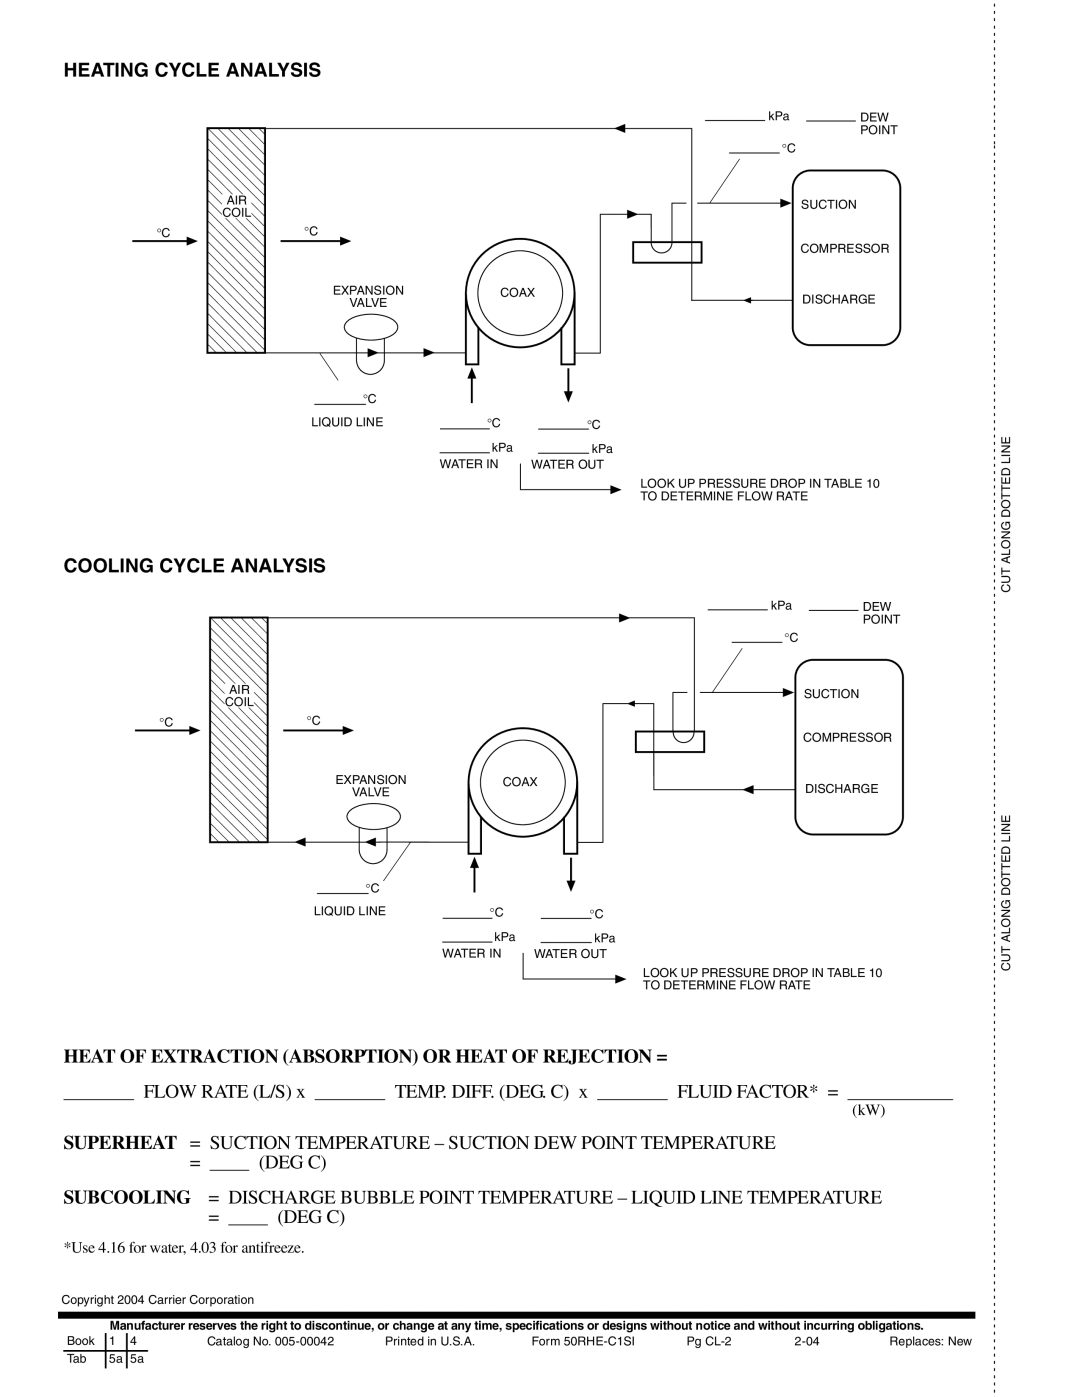 Carrier 50RHE006-060 Heating Cycle Analysis, Cooling Cycle Analysis, Flow Rate L/S, Temp. Diff. Deg. C, Fluid Factor* = 